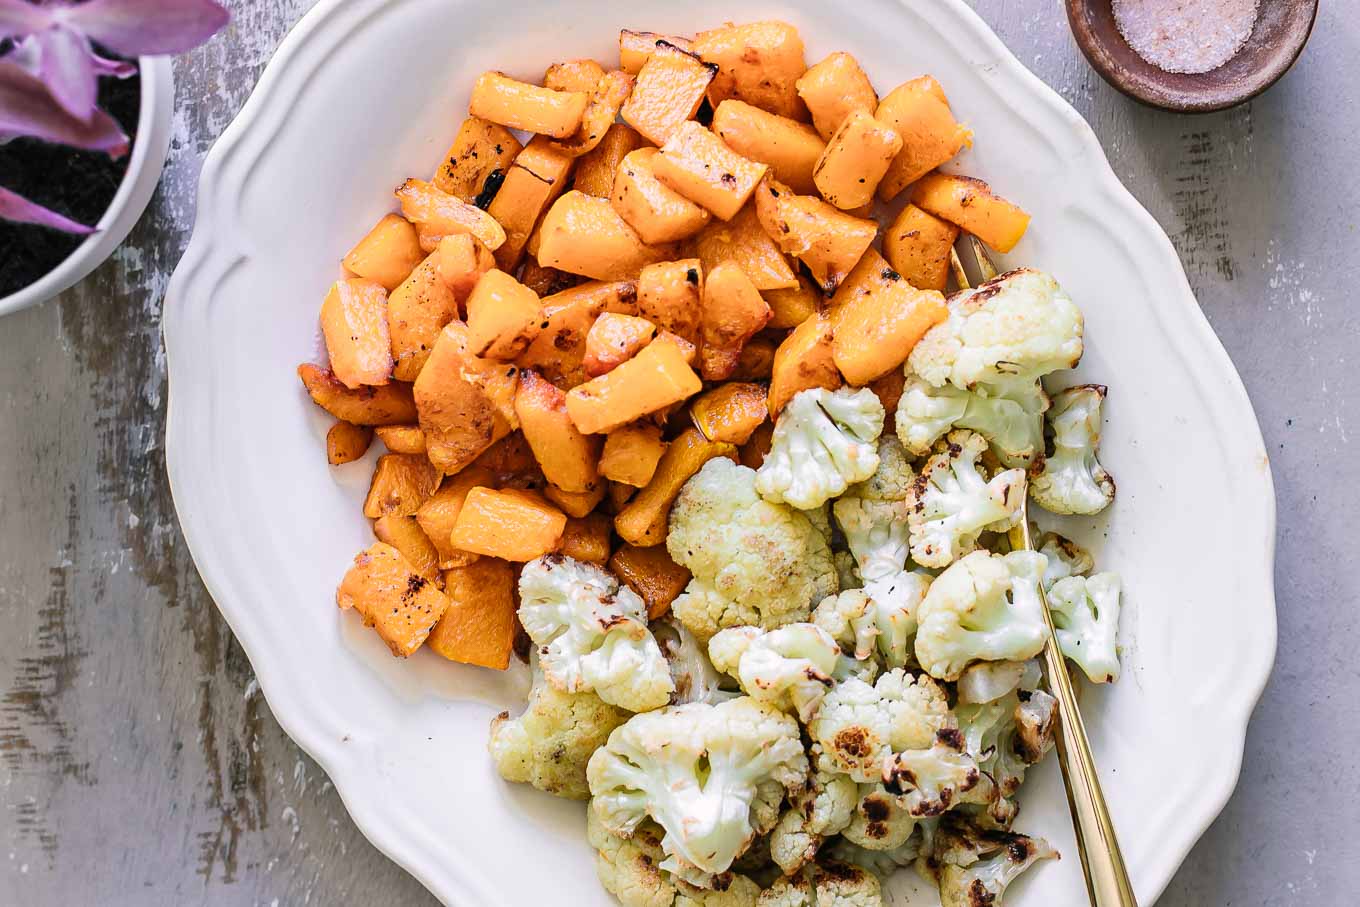 baked cauliflower and butternut squash side dish on a wood table